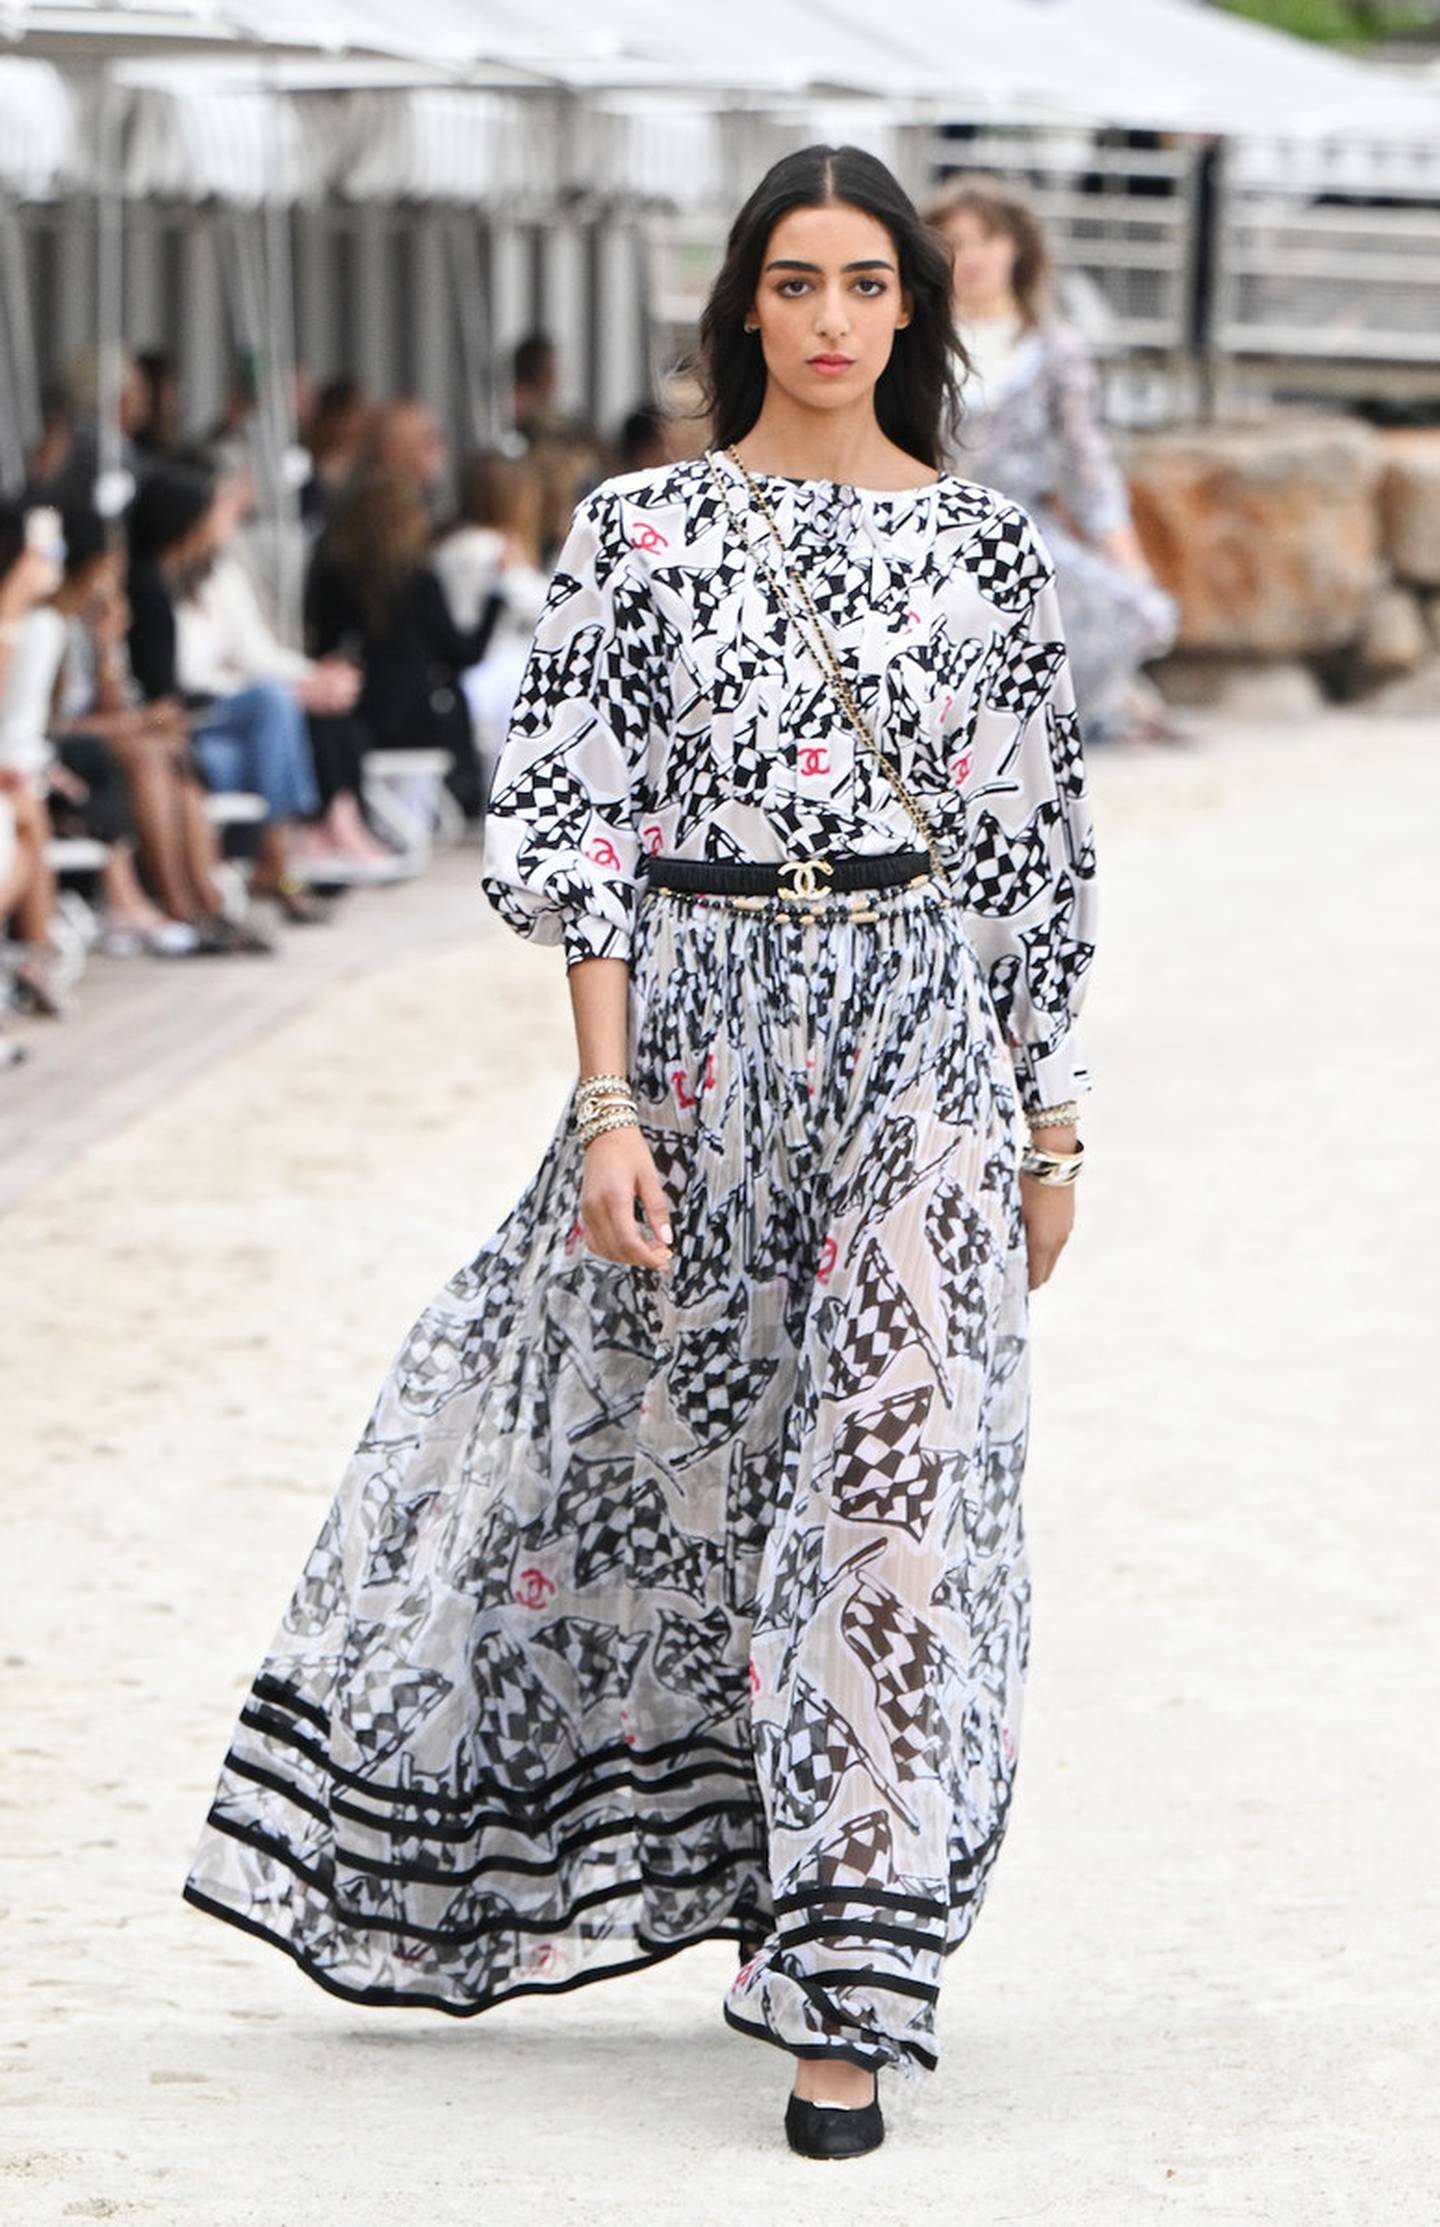 British-Moroccan model Nora Attal wore a flowing dress patterned with checkered flags, for Chanel Cruise. Photo: Chanel